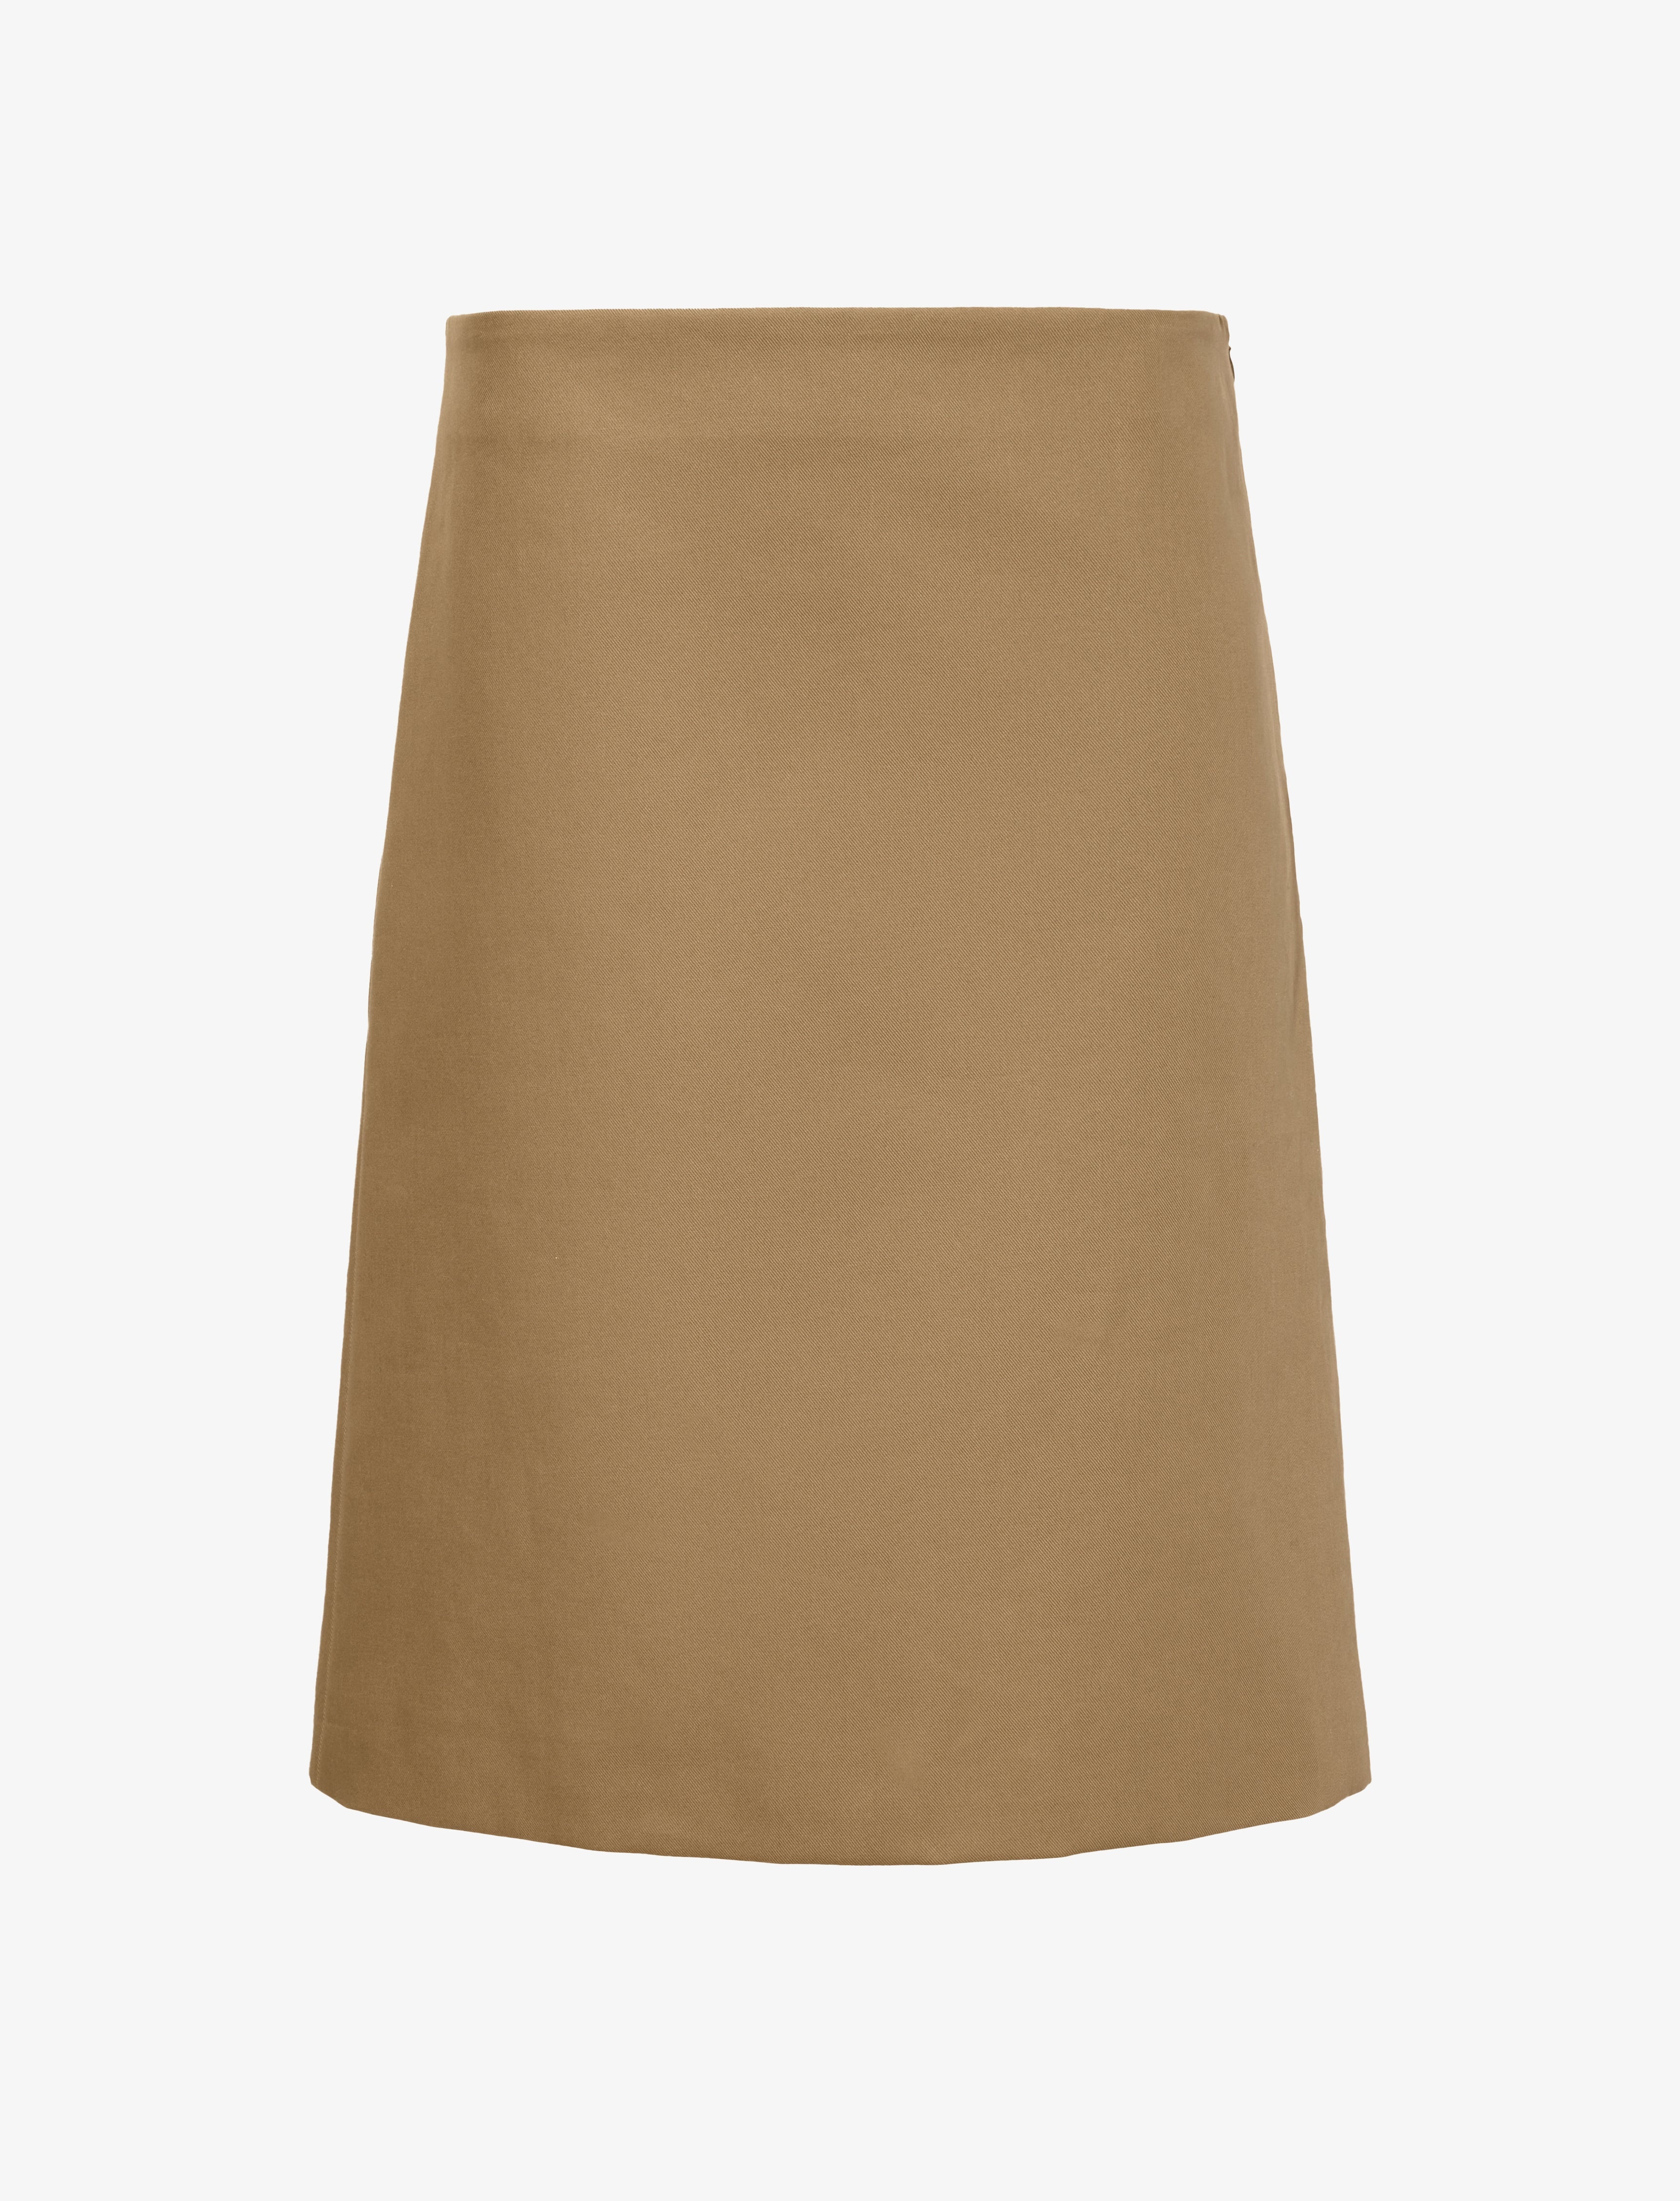 Adele Skirt in Eco Cotton Twill - 1